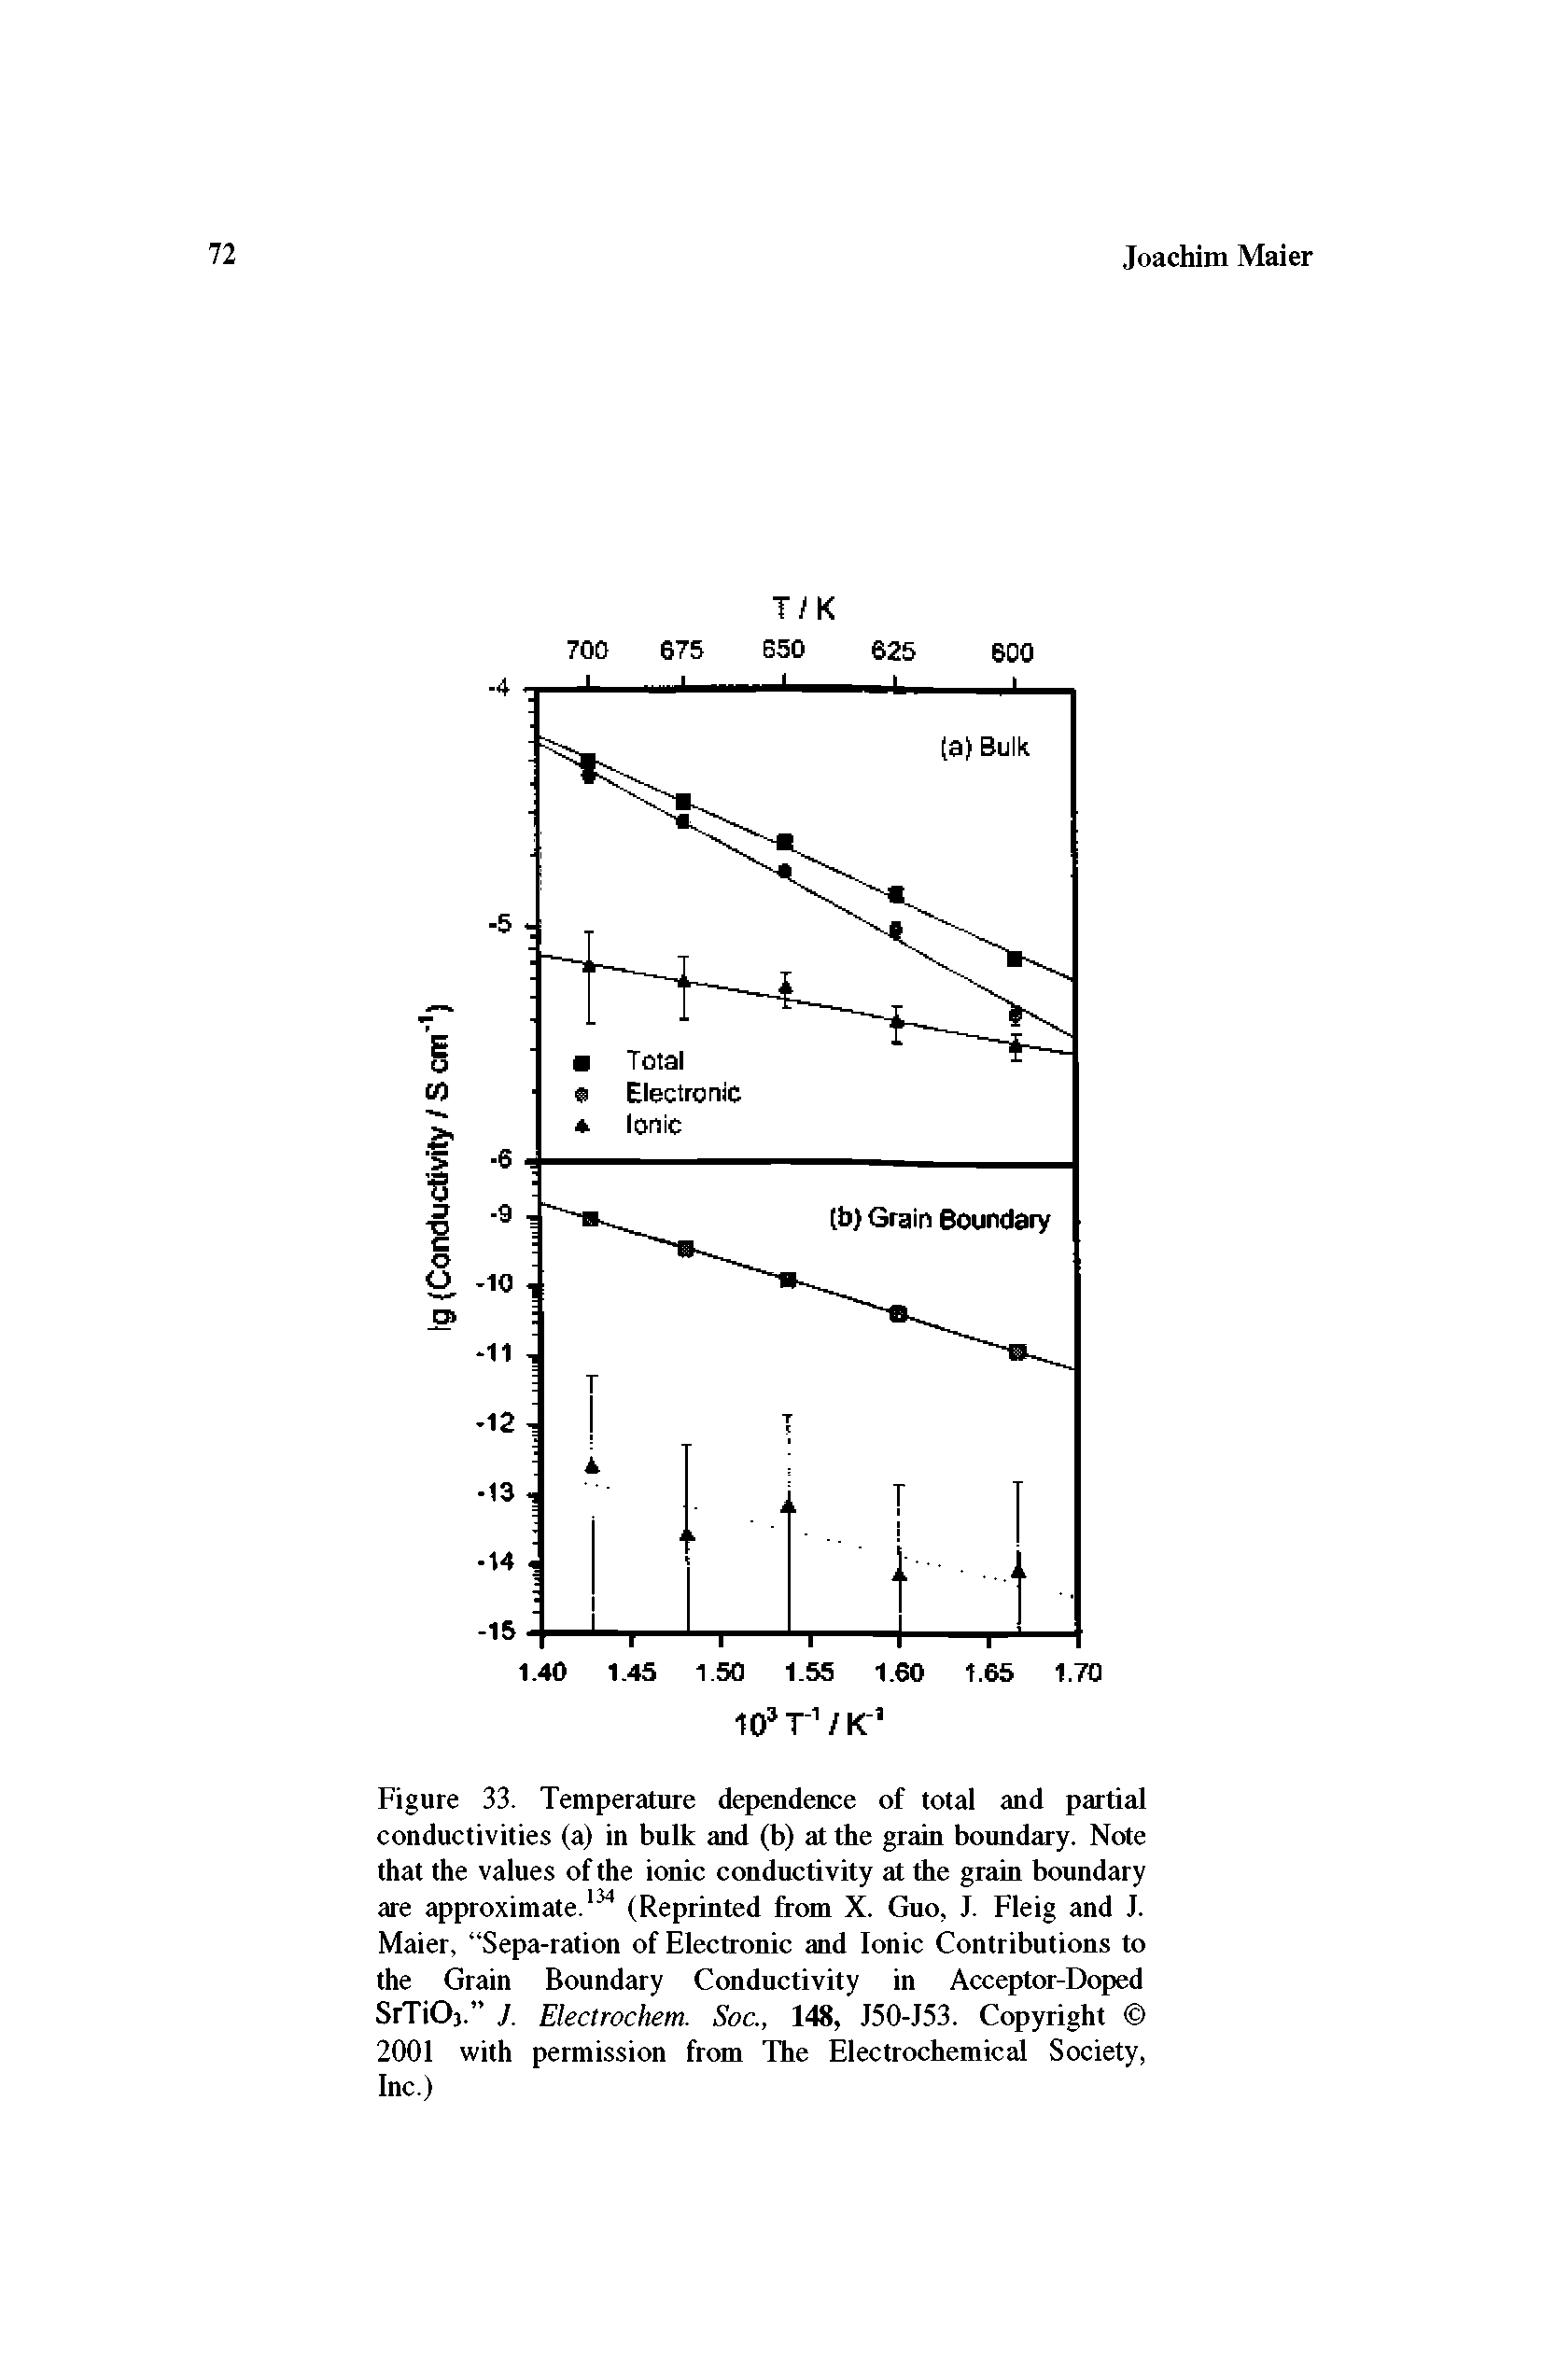 Figure 33. Temperature dependence of total and partial conductivities (a) in bulk and (b) at the grain boundary. Note that the values of the ionic conductivity at the grain boundary are approximate.134 (Reprinted from X. Guo, J. Fleig and J. Maier, Sepa-ration of Electronic and Ionic Contributions to the Grain Boundary Conductivity in Acceptor-Doped SrTiOj. J. Electrochem. Soc., 148, J50-J53. Copyright 2001 with permission from The Electrochemical Society, Inc.)...